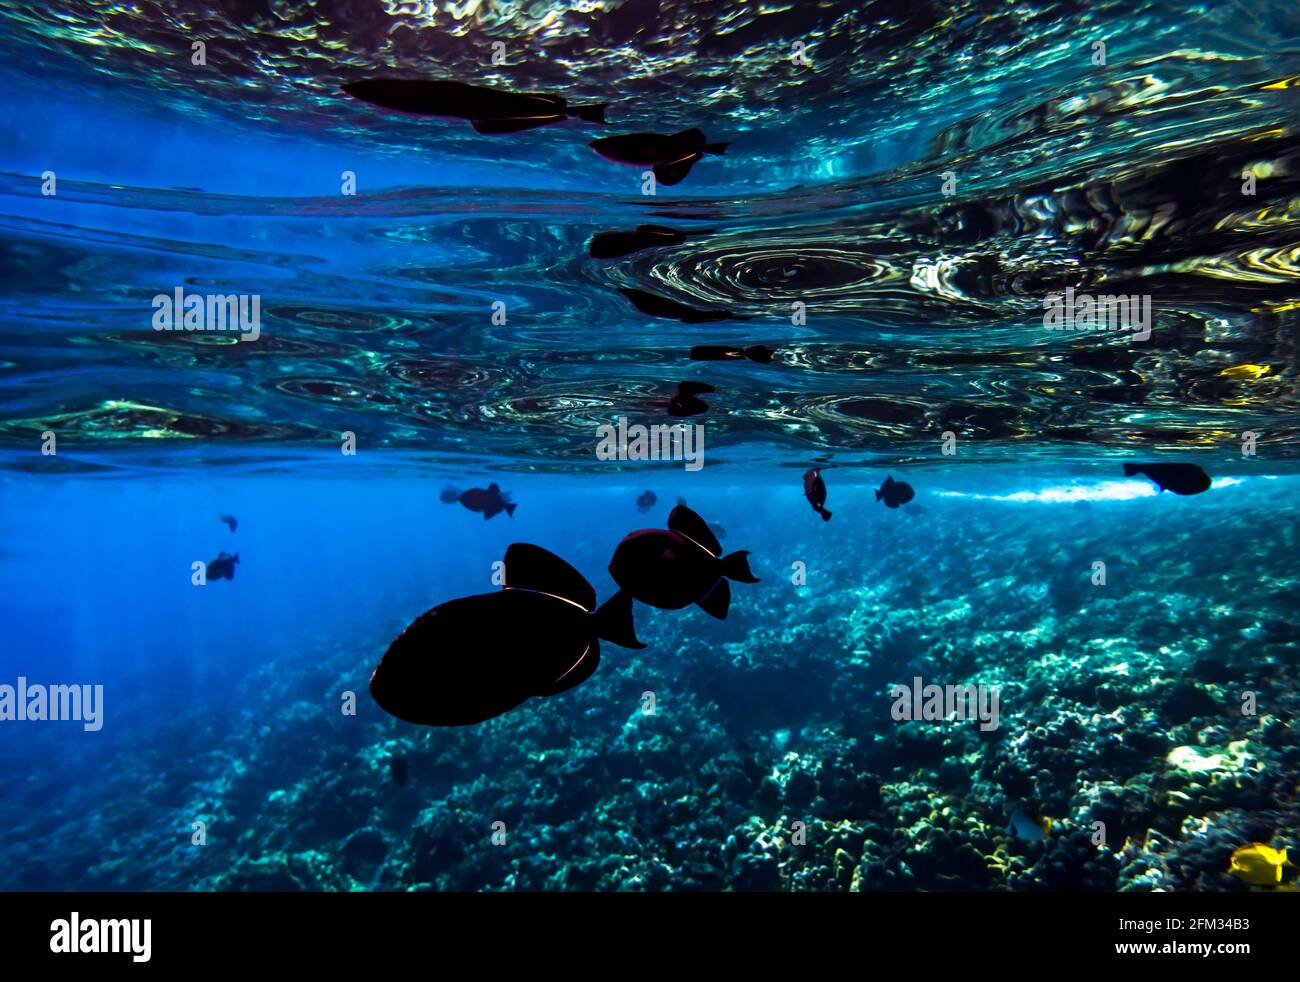 Coral reef and fish reflected in ocean surface conceptual image taken underwater in Hawaii. Stock Photo